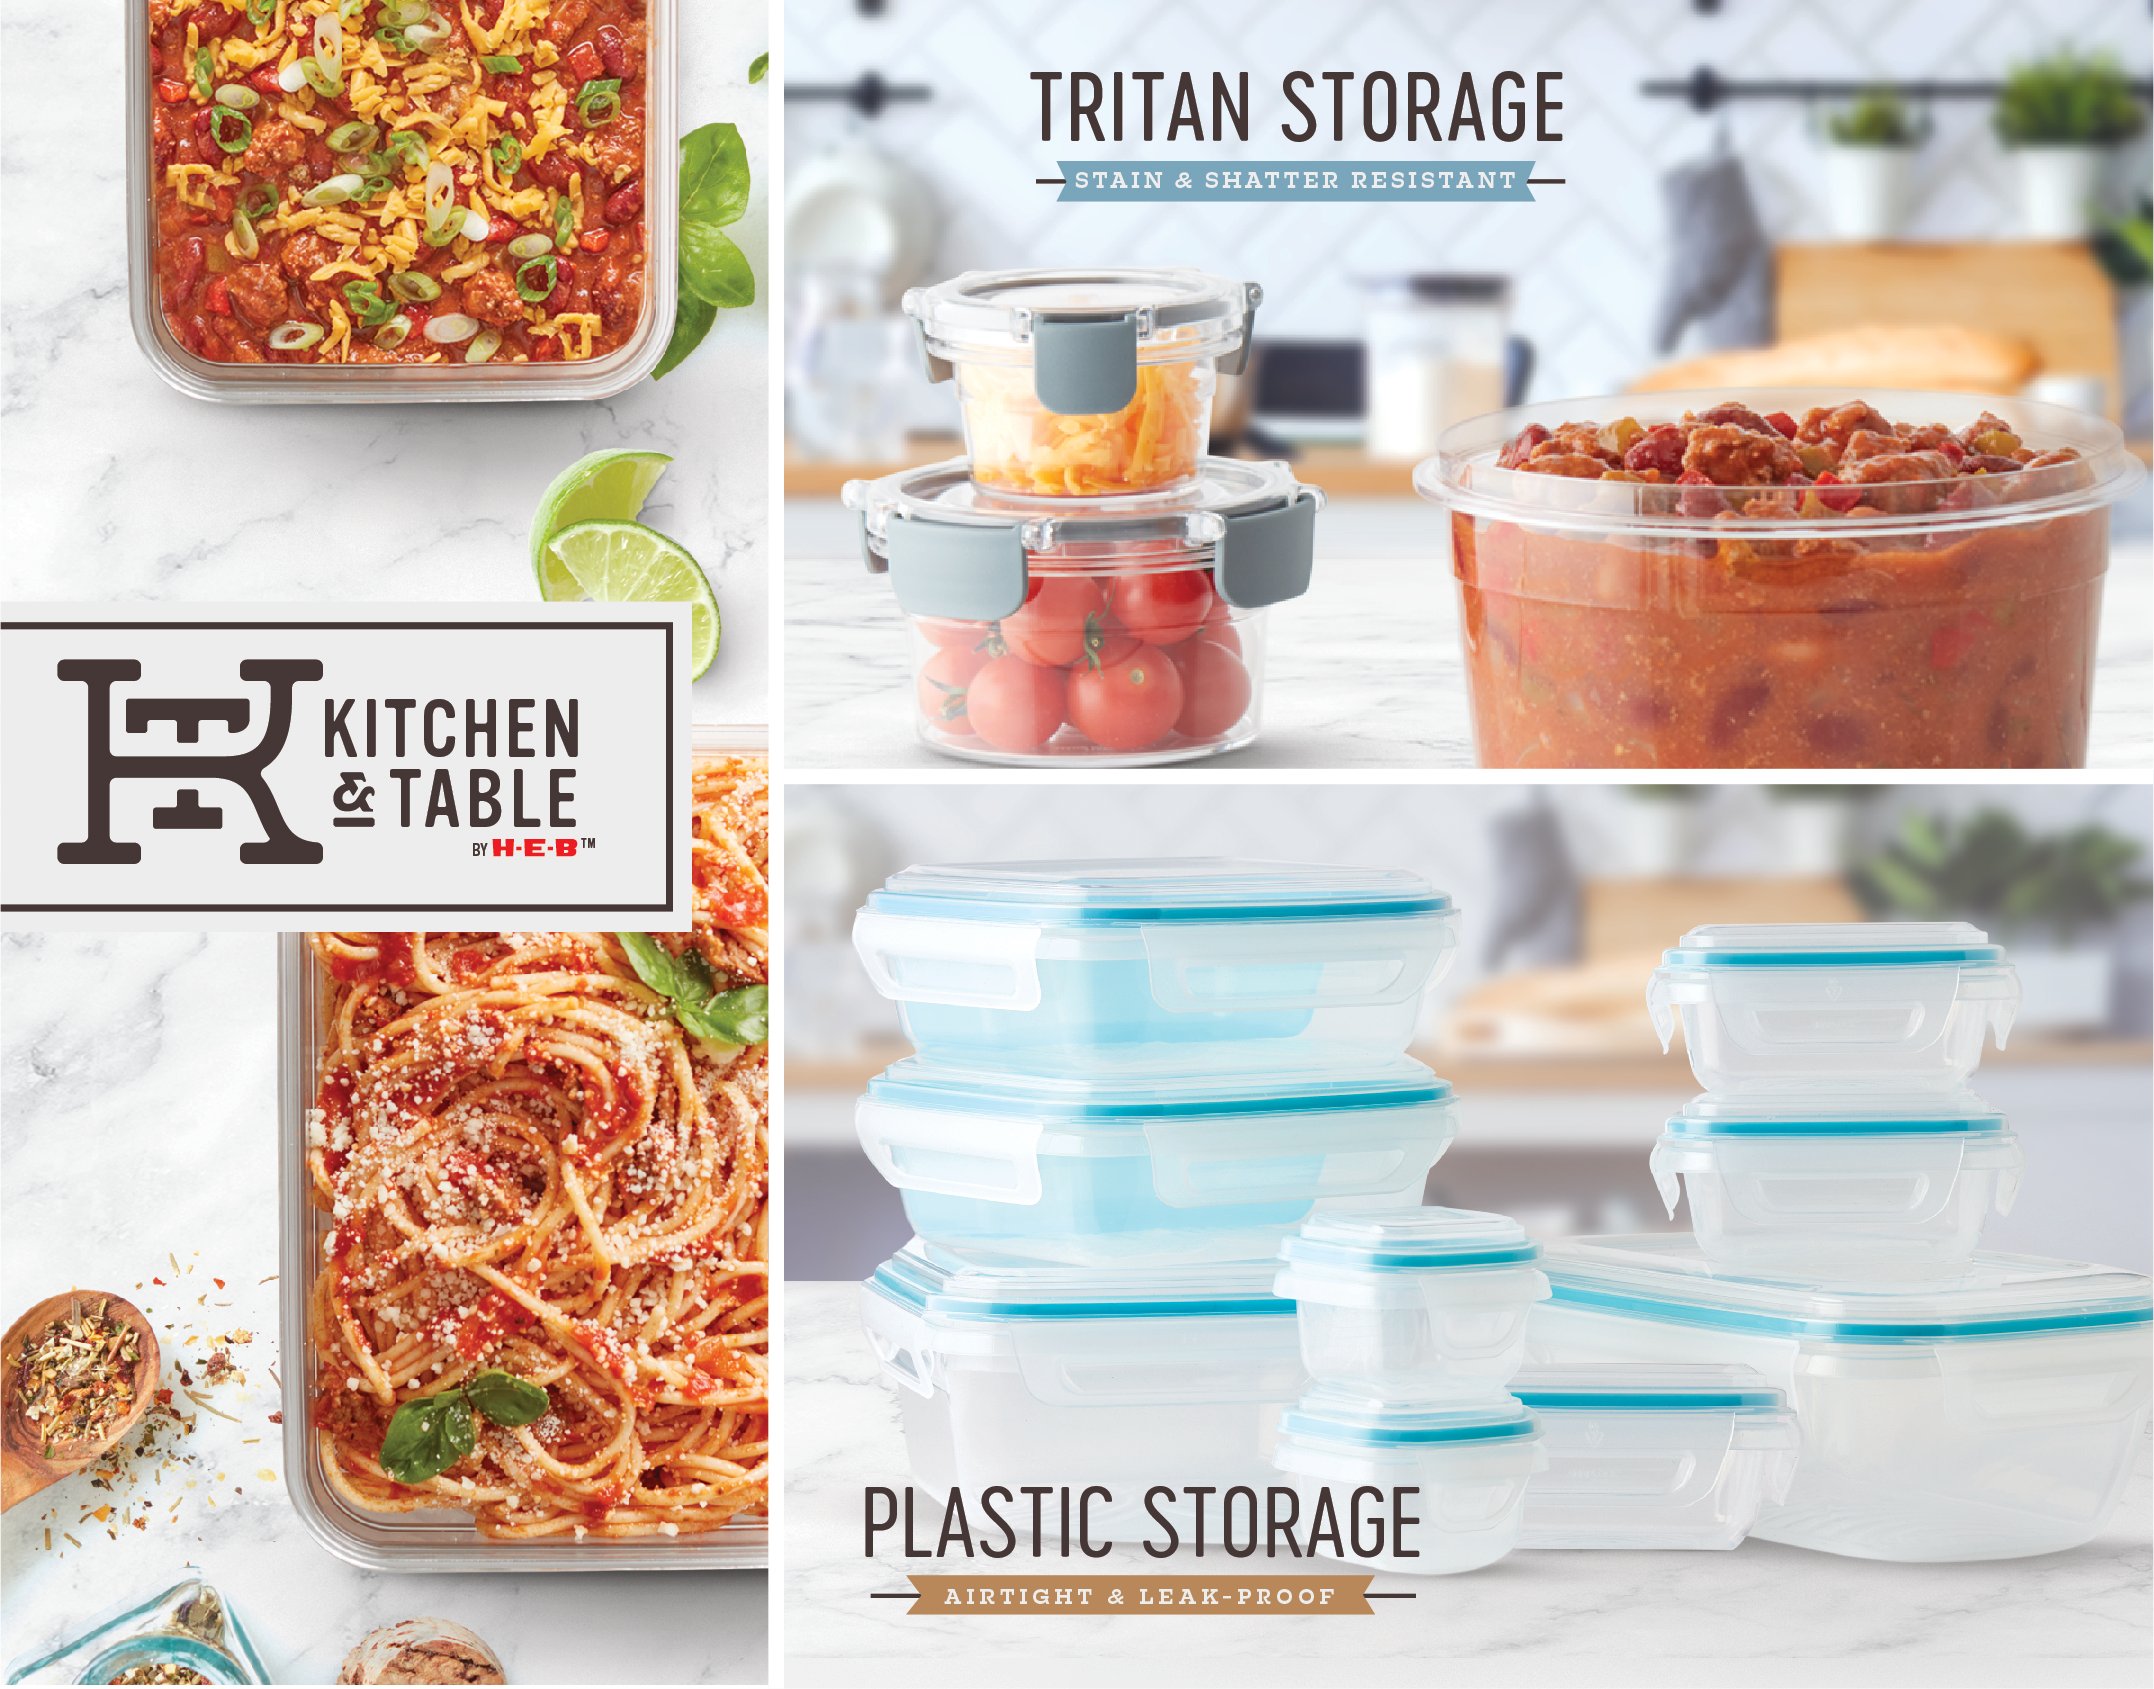 Sterilite UltraSeal Food Storage Containers, 12 Piece Set - Shop Food  Storage at H-E-B